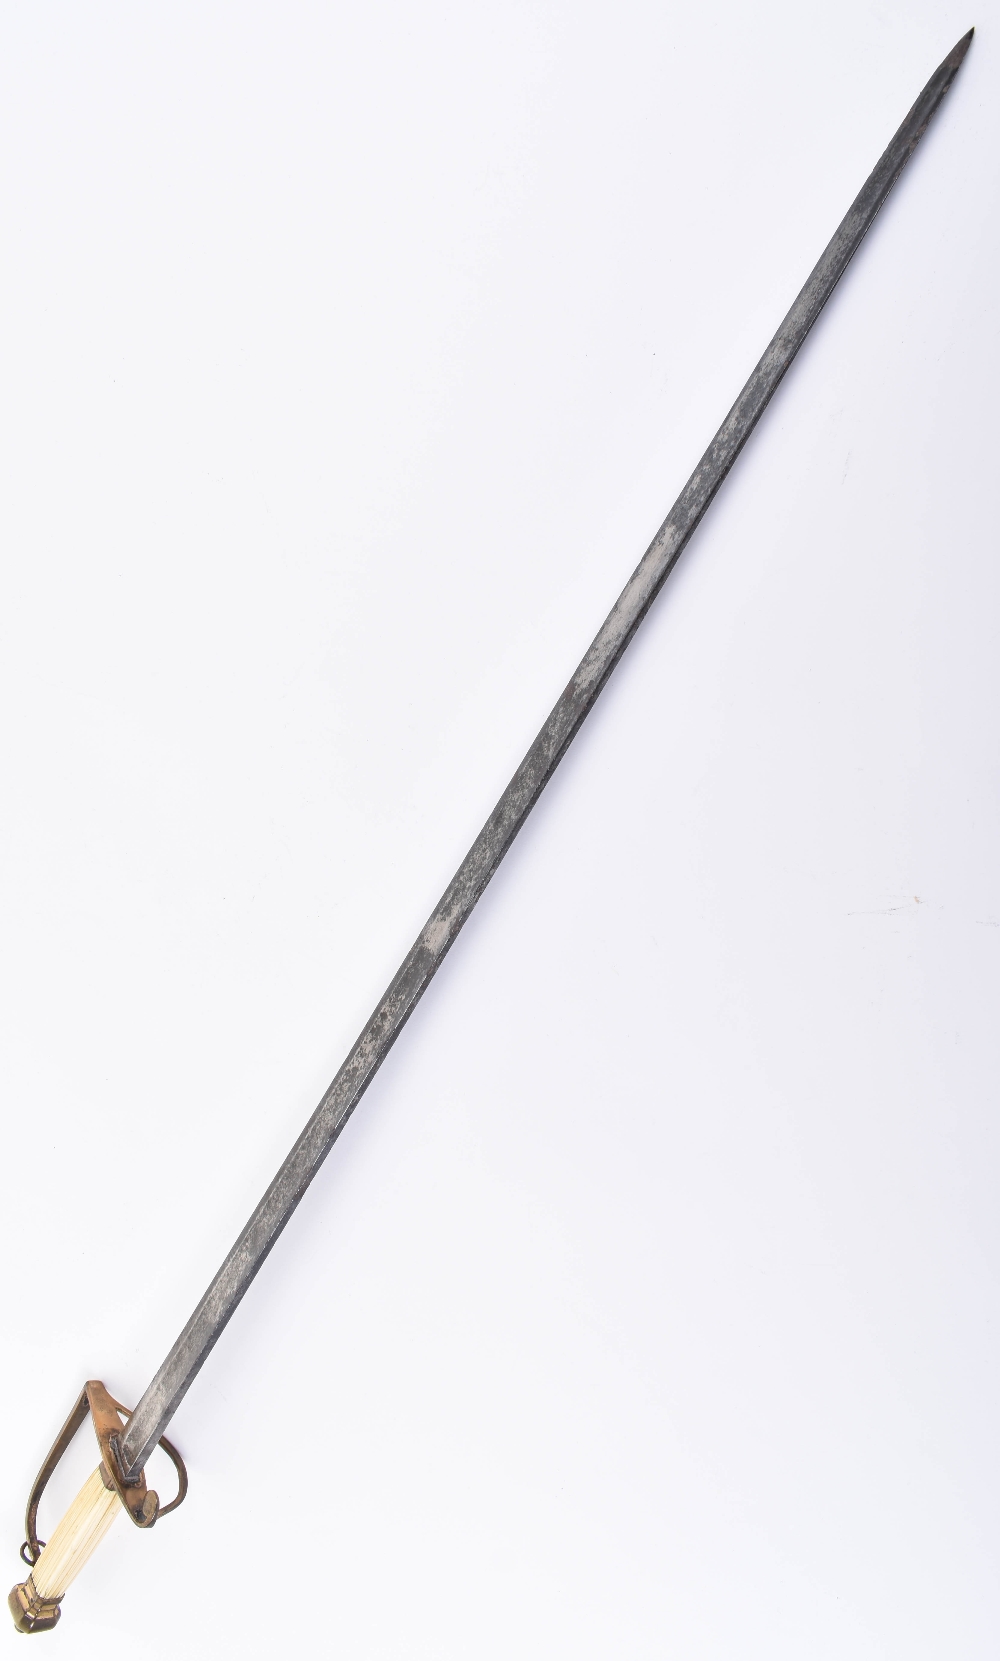 ^ Infantry officer’s sword spadroon c.1800 - Image 10 of 11